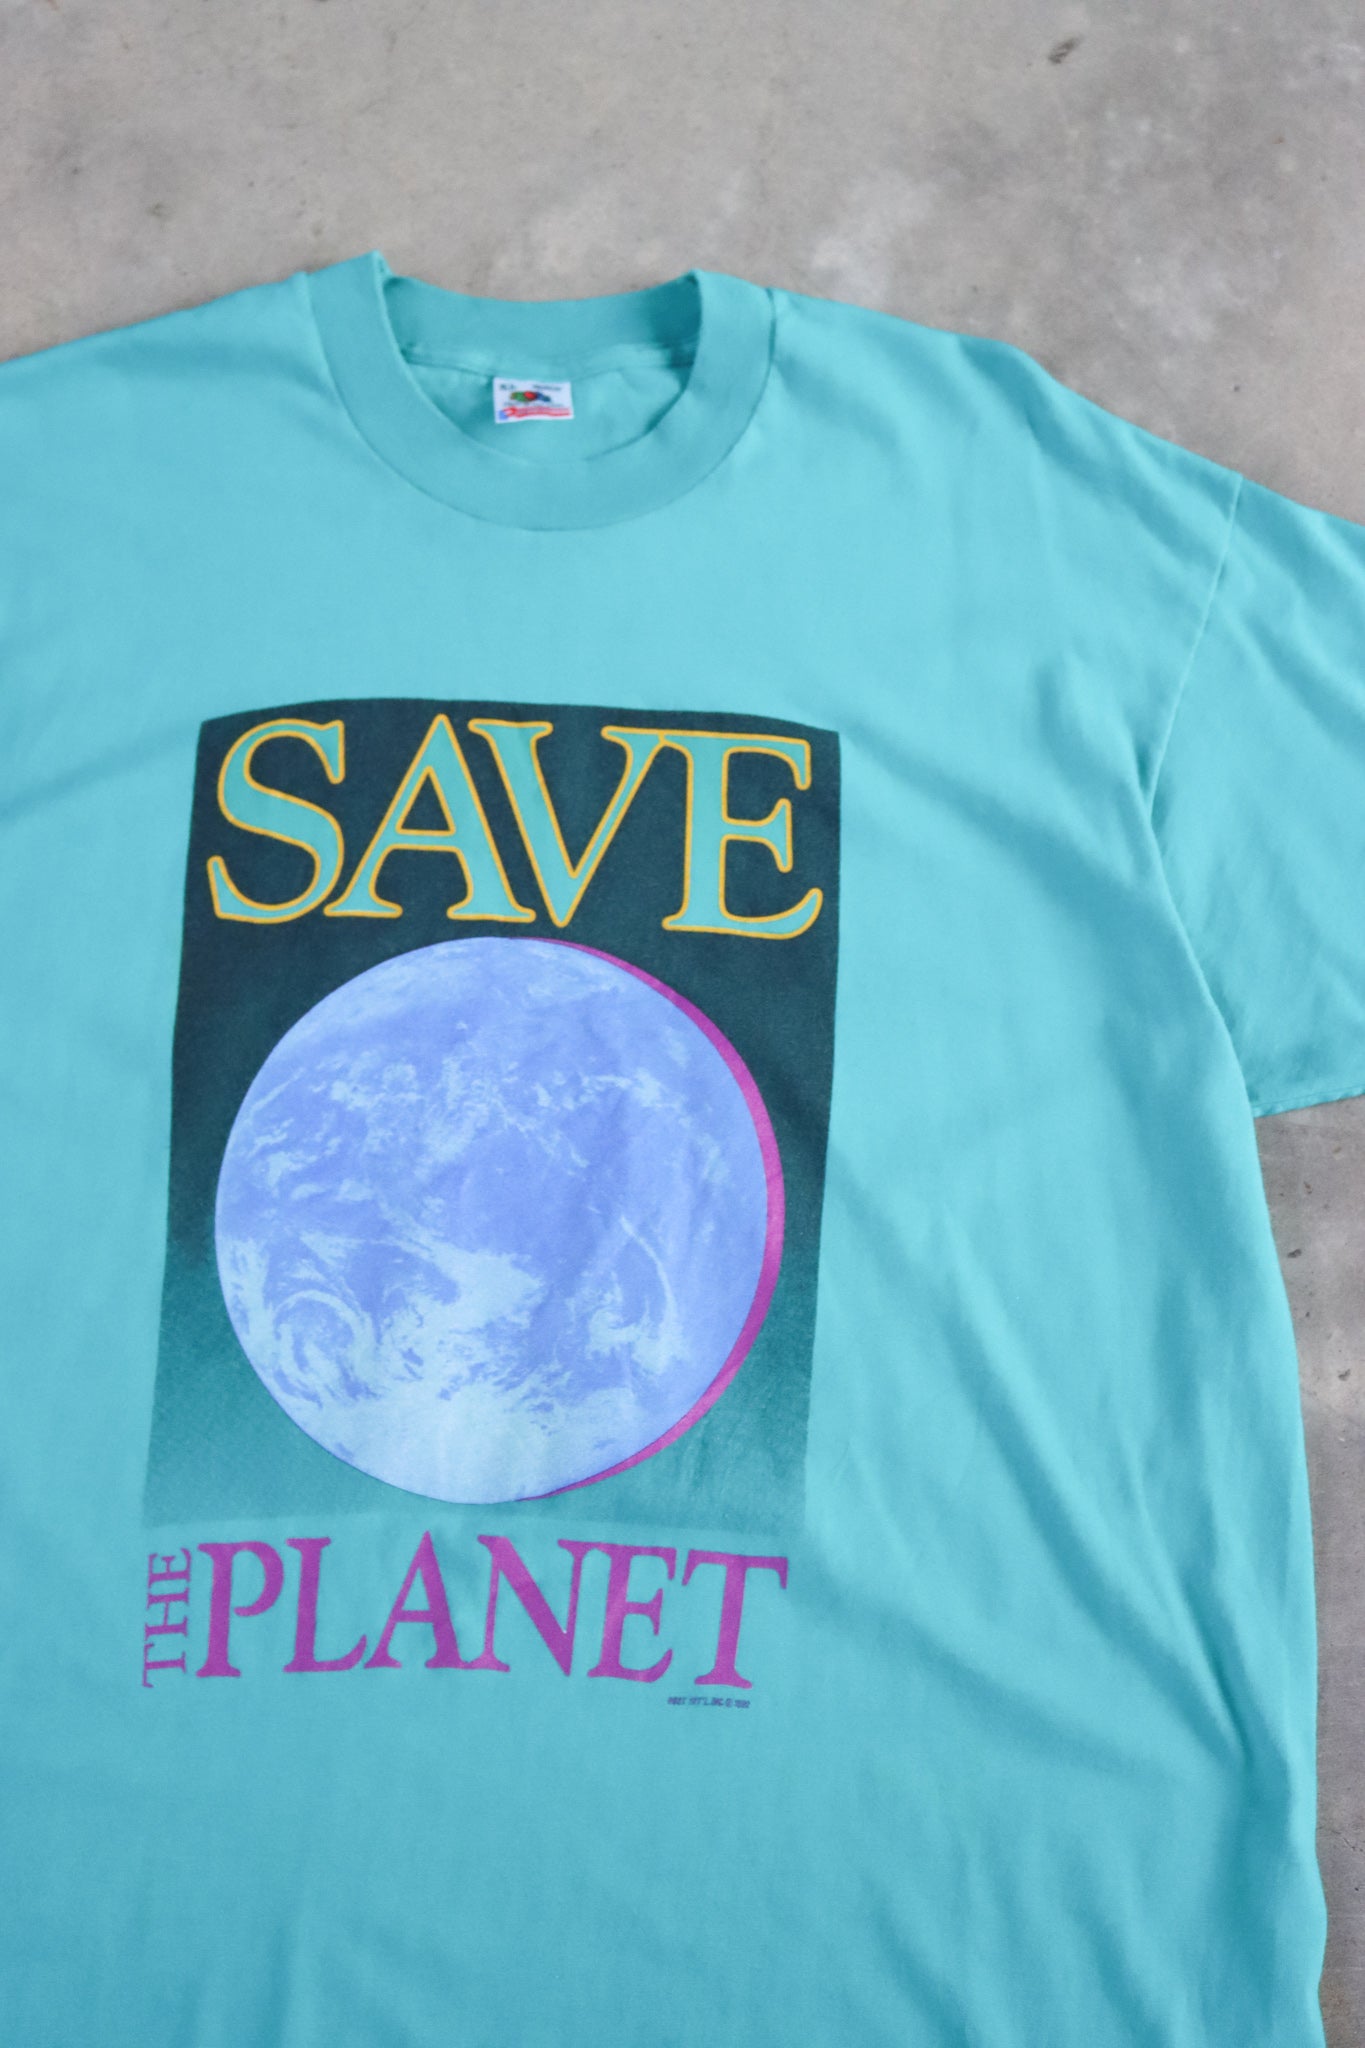 Vintage 1992 Save the Planet Tee XL